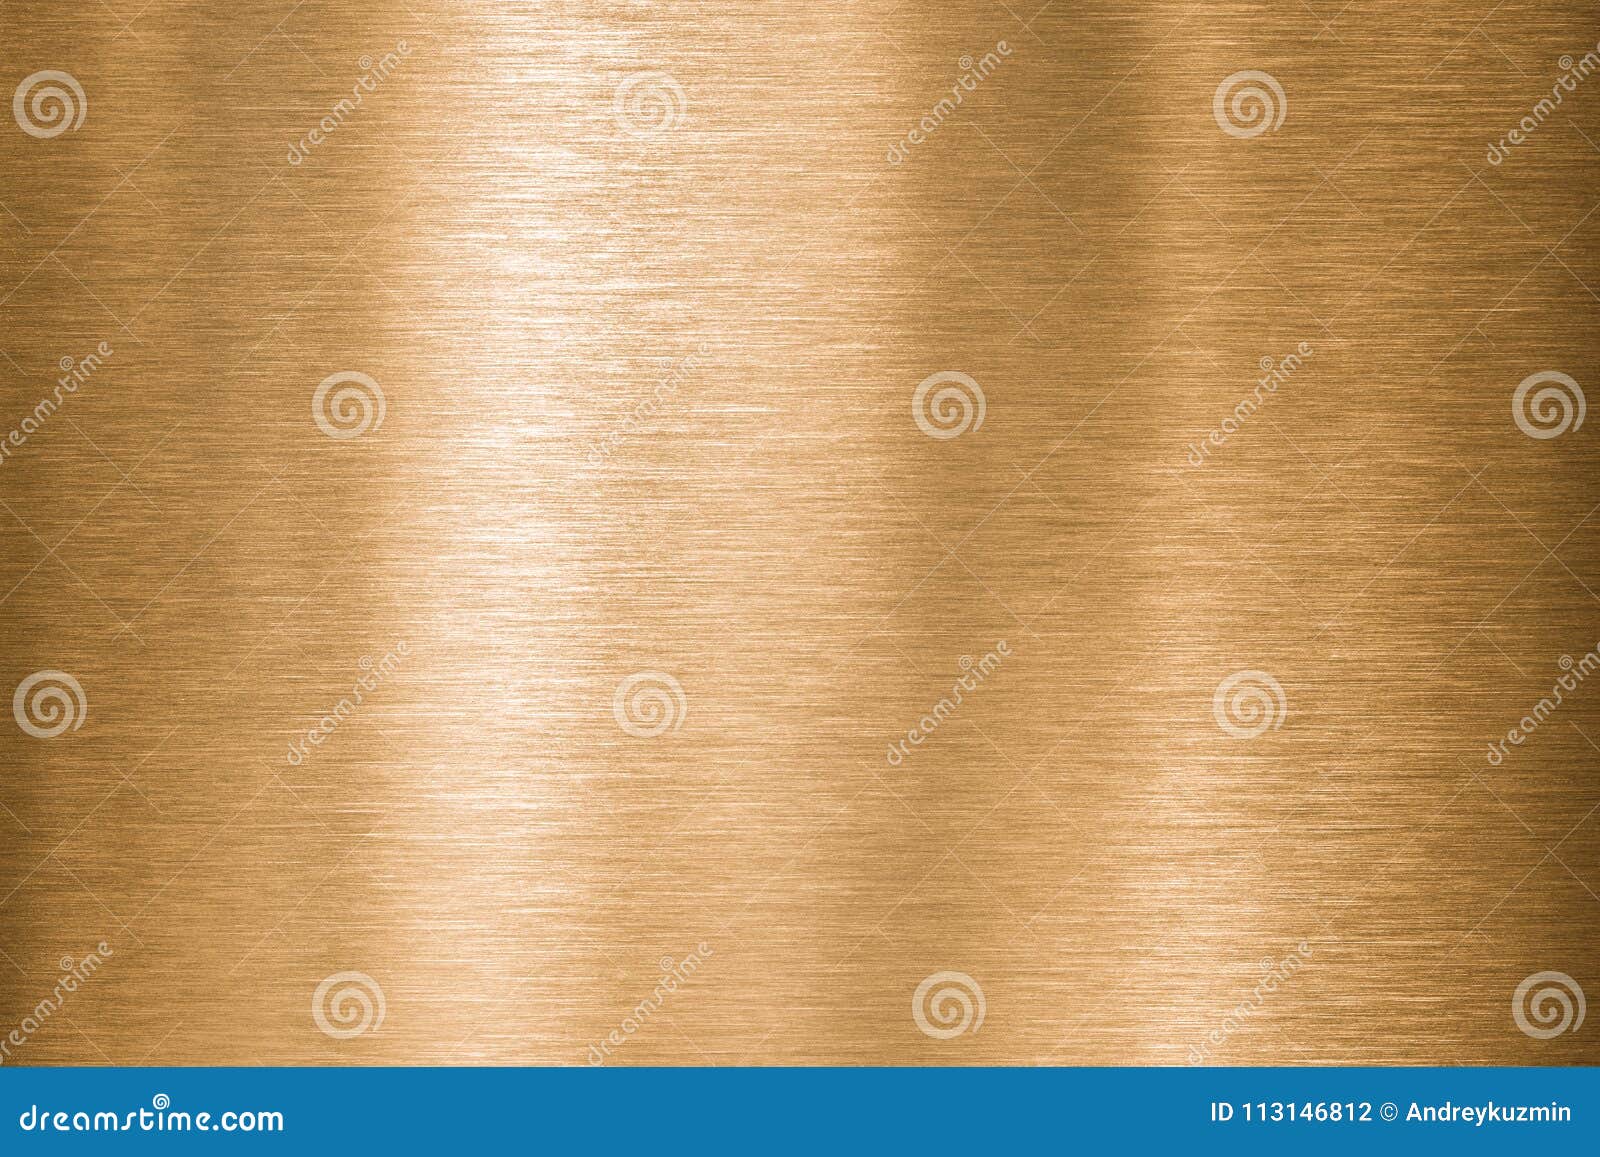 gold, bronze or copper metal brushed texture